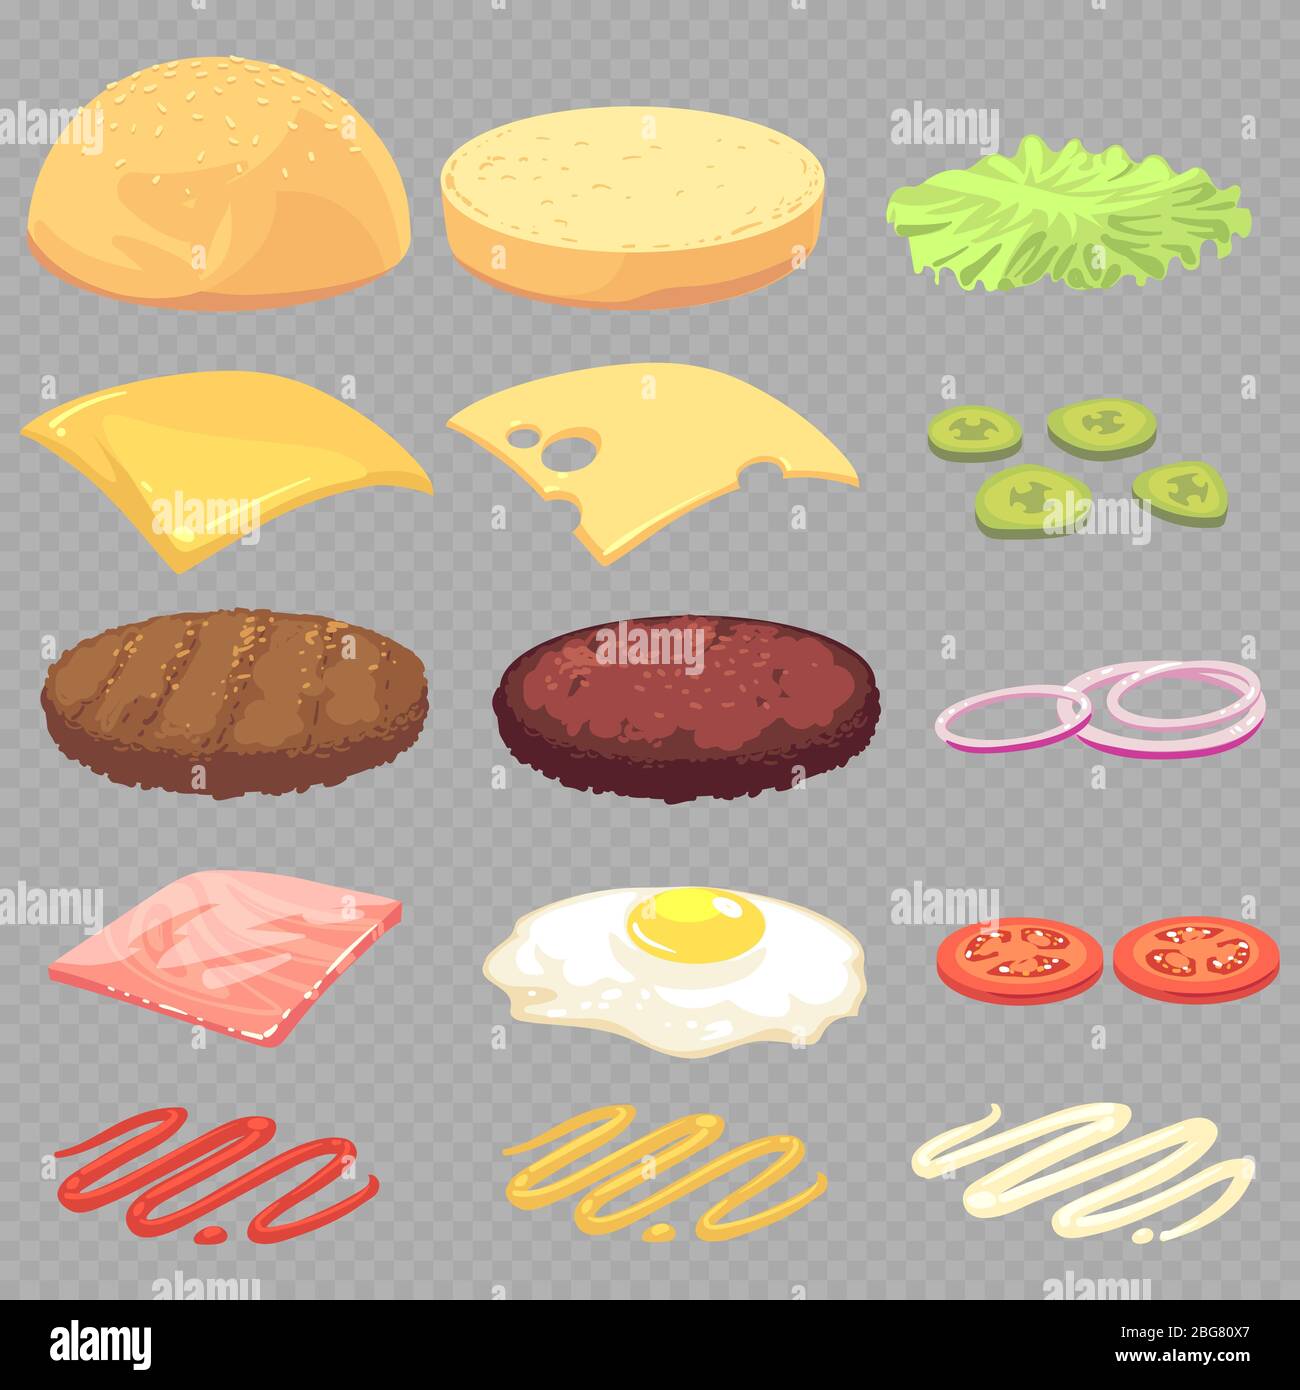 Sandwich, burger, cheeseburger food ingredients cartoon vector set isolated on transparent background. Vector cheese and meat, tasty and fast illustra Stock Vector